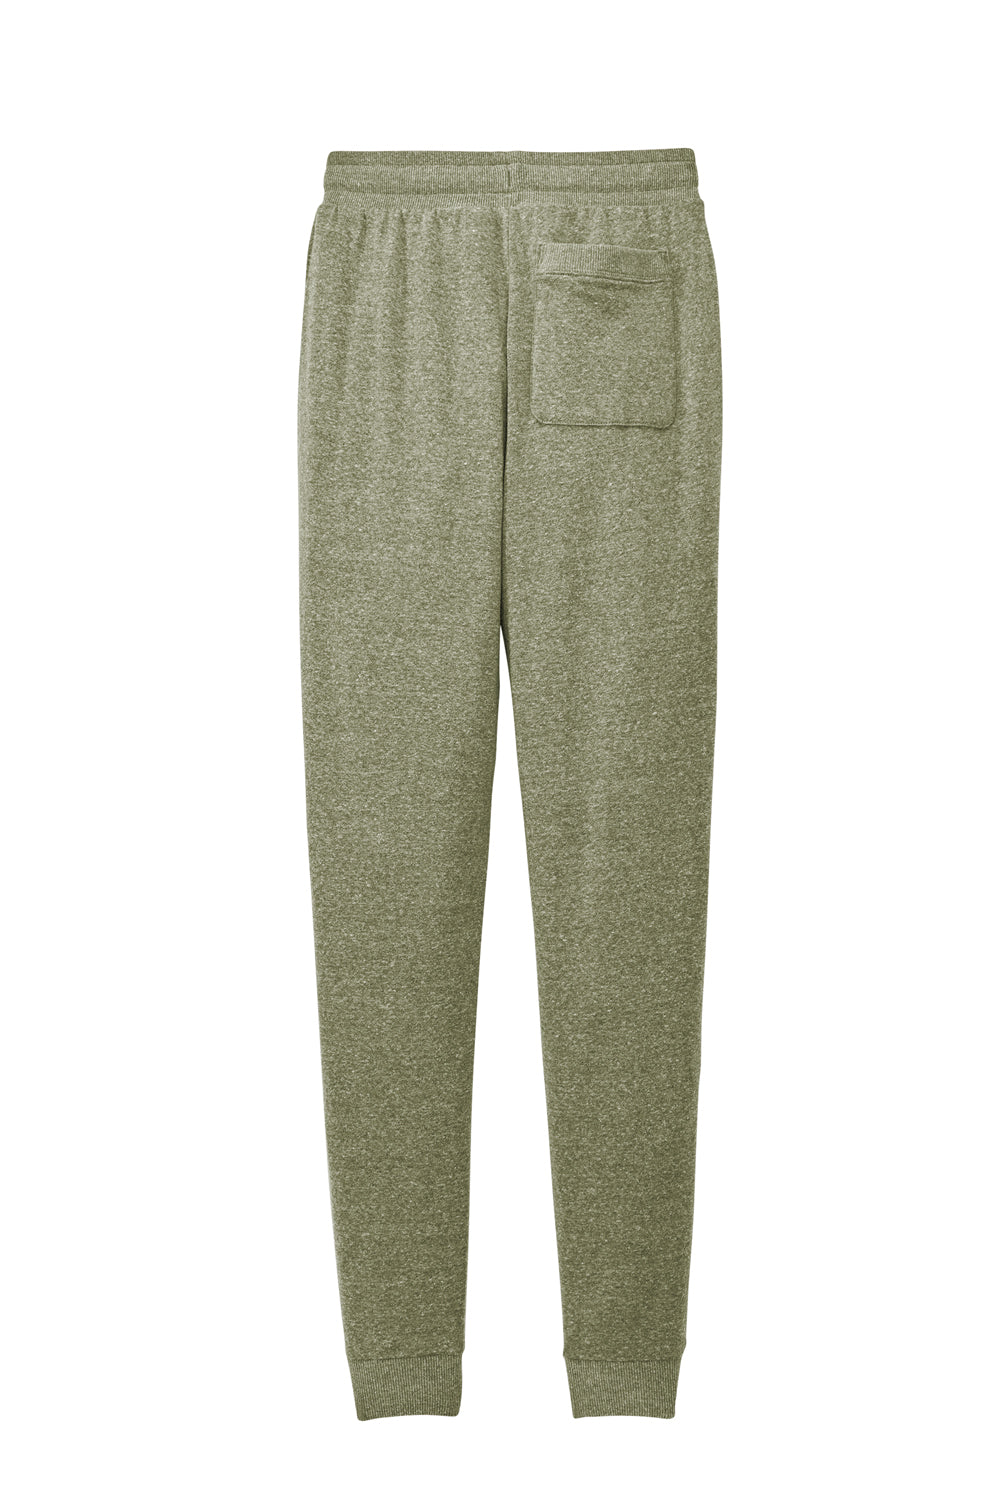 District DT1307 Mens Perfect Tri Fleece Jogger Sweatpants w/ Pockets Military Green Frost Flat Back